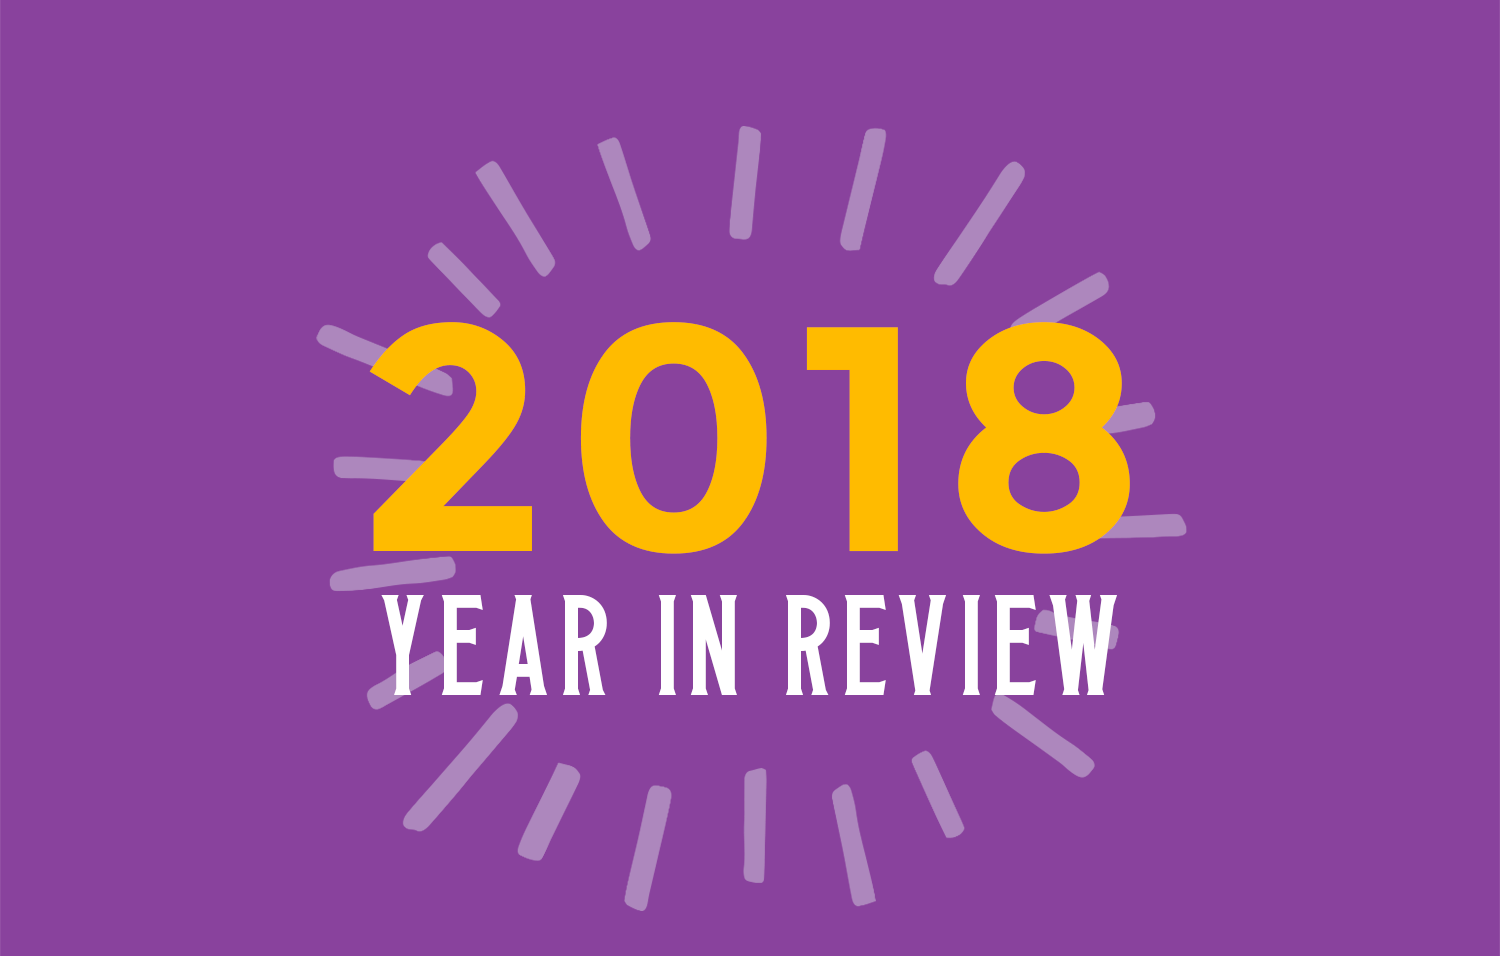 Best of 2018 Articles